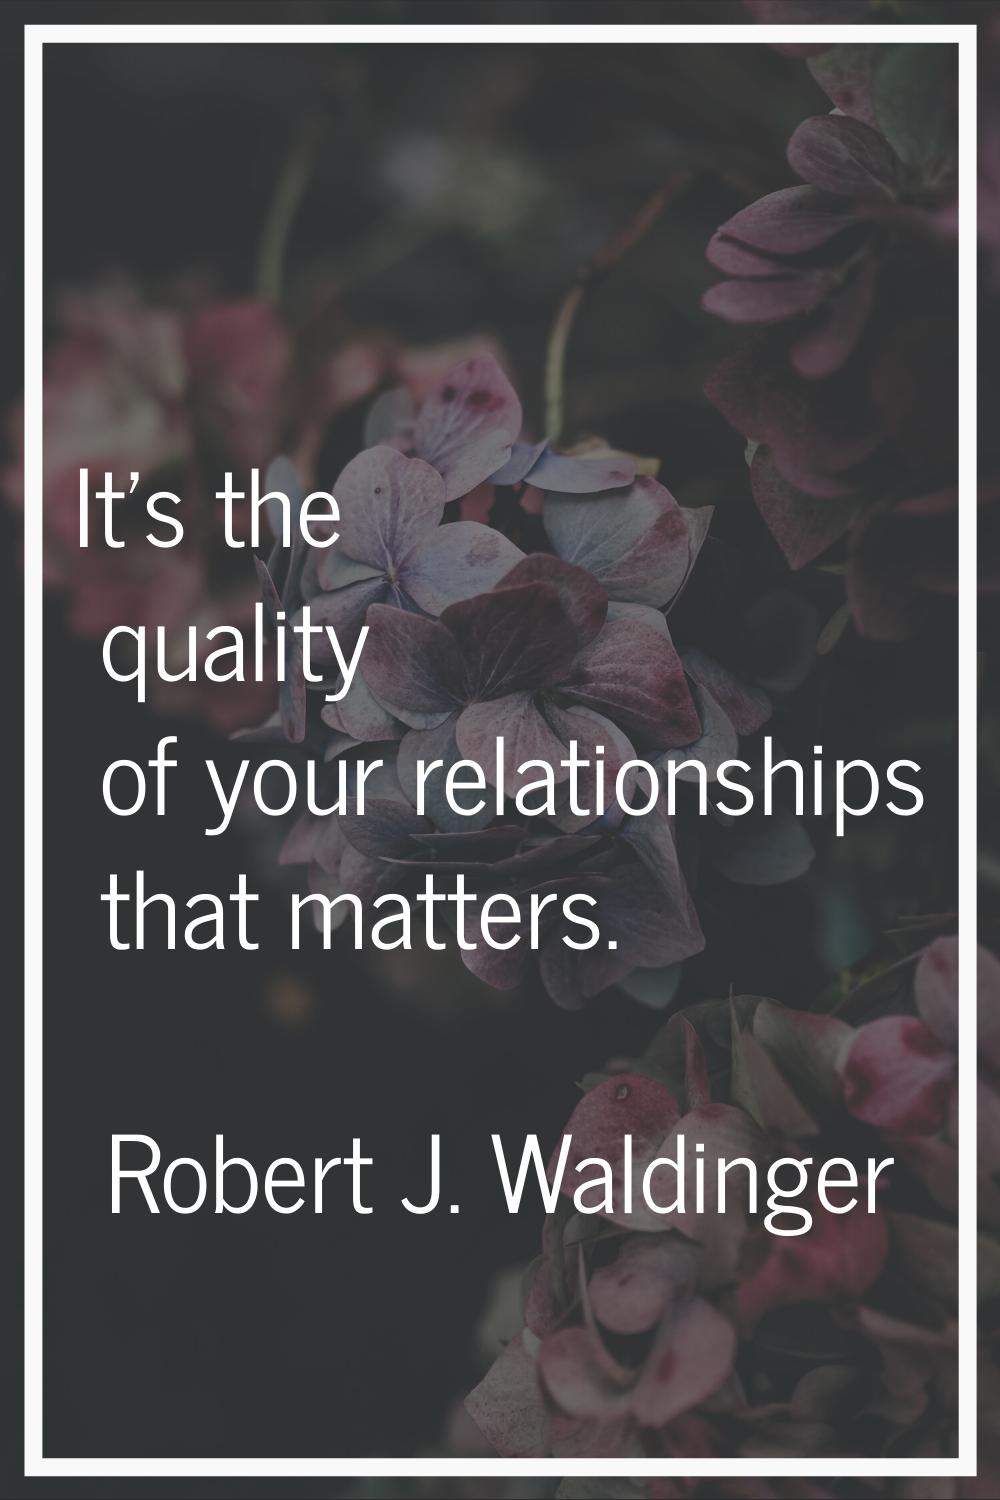 It's the quality of your relationships that matters.